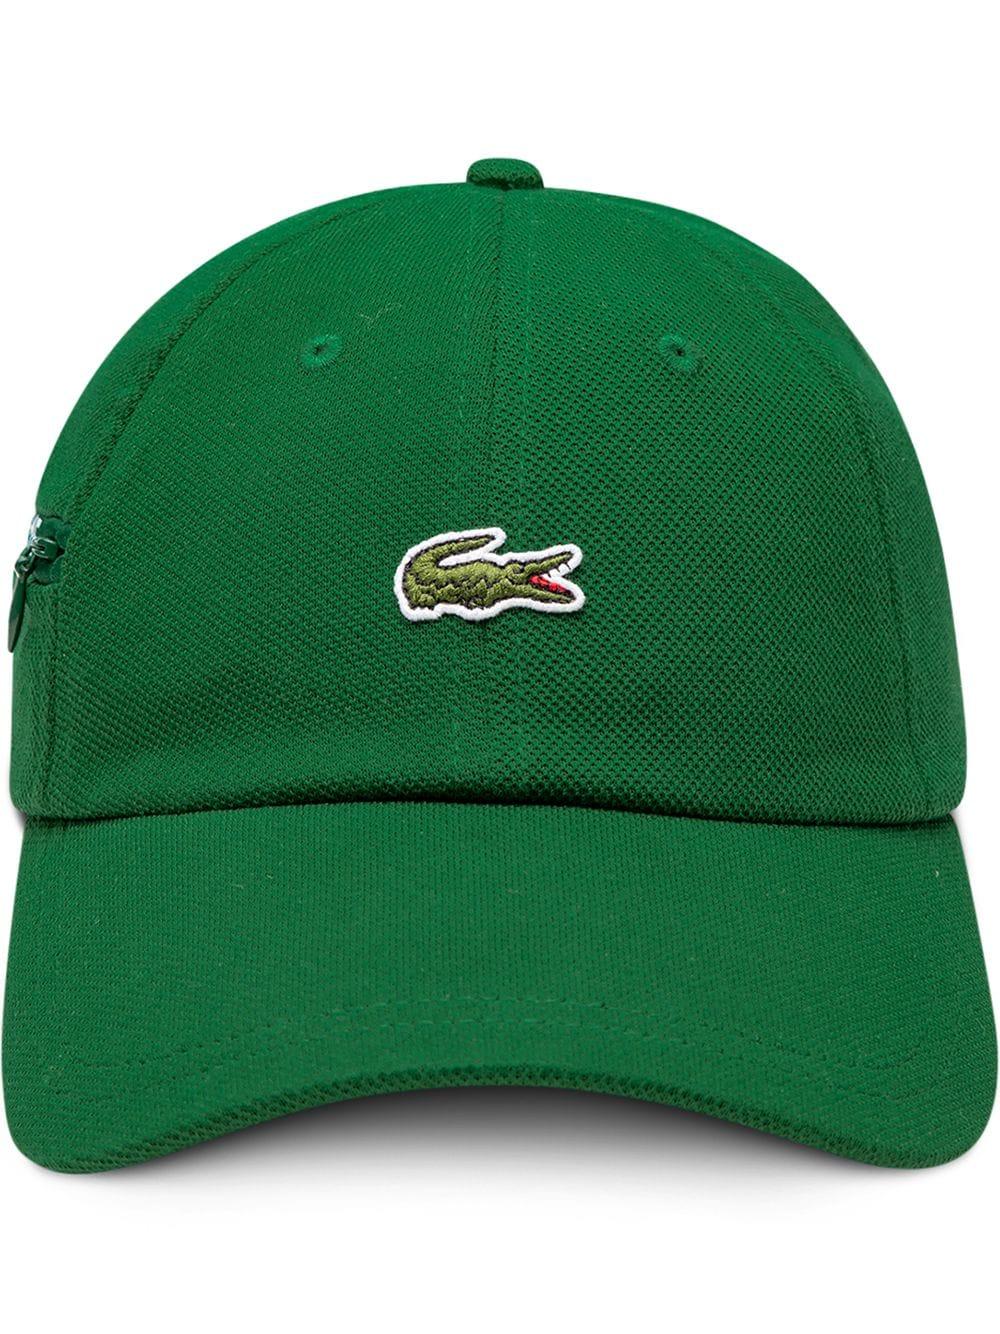 Supreme X Lacoste Pique 6-panel Cap in Green | Lyst